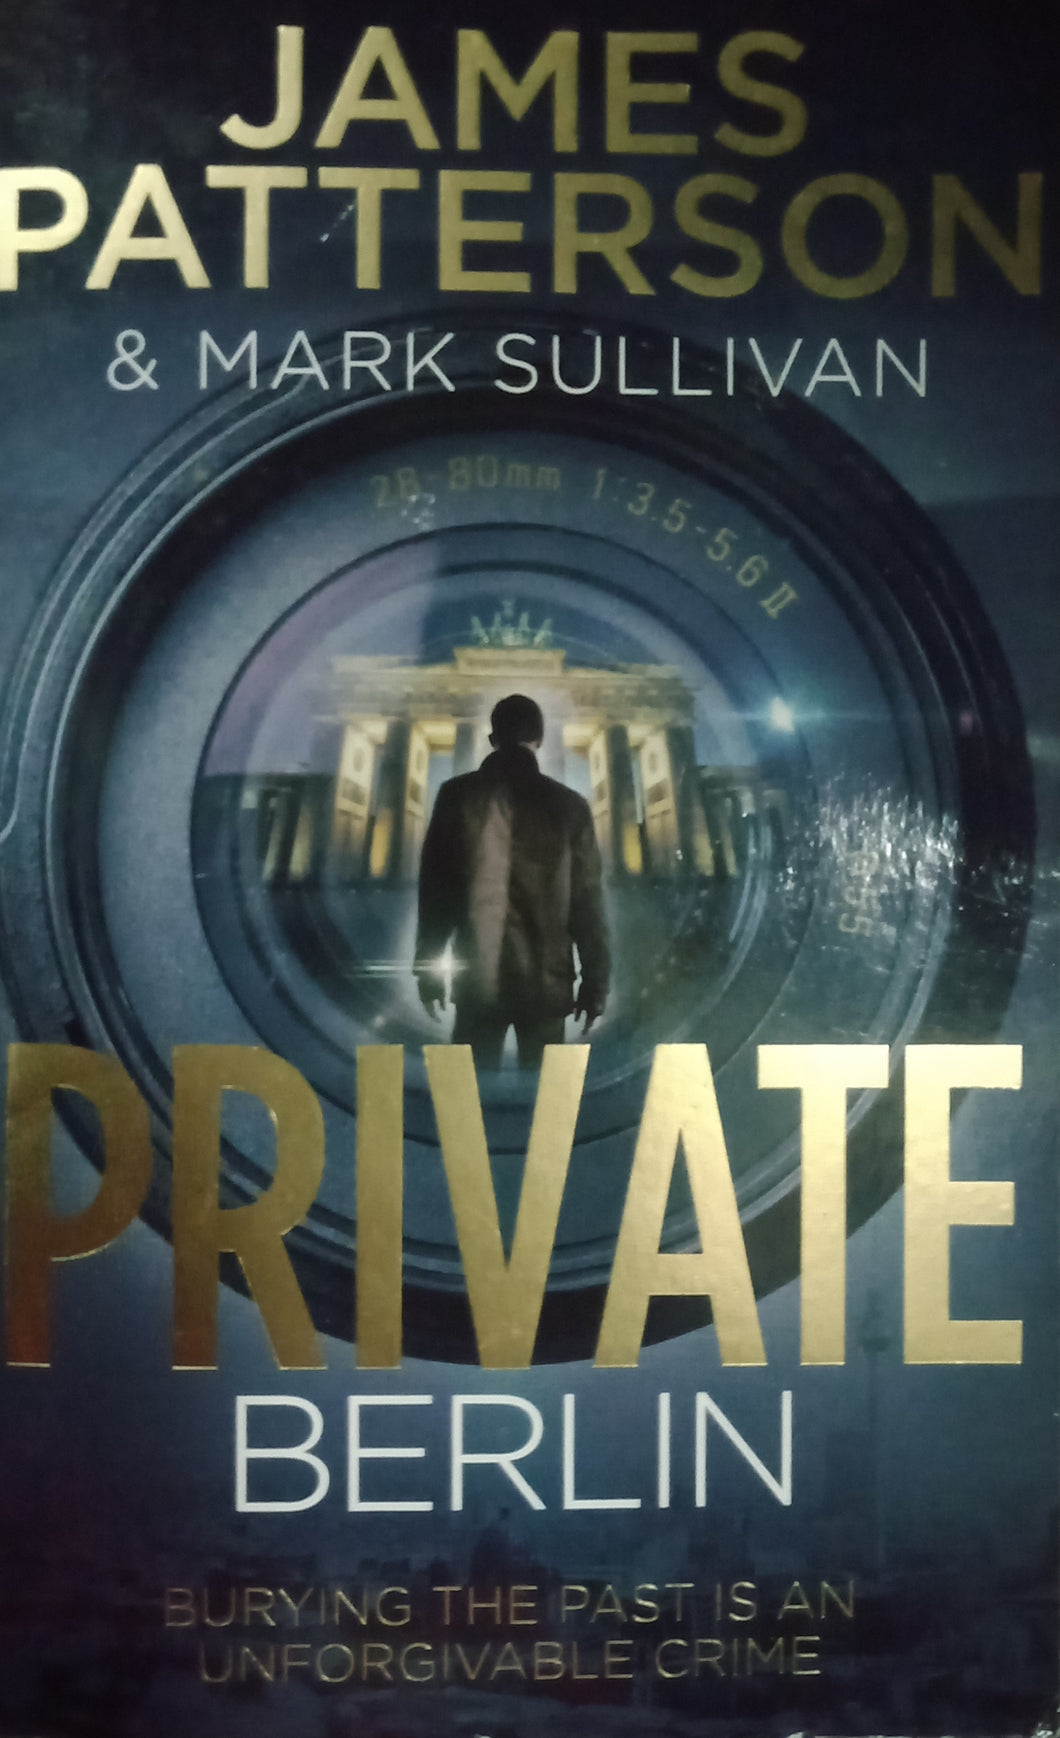 Private Berlin By James Patterson